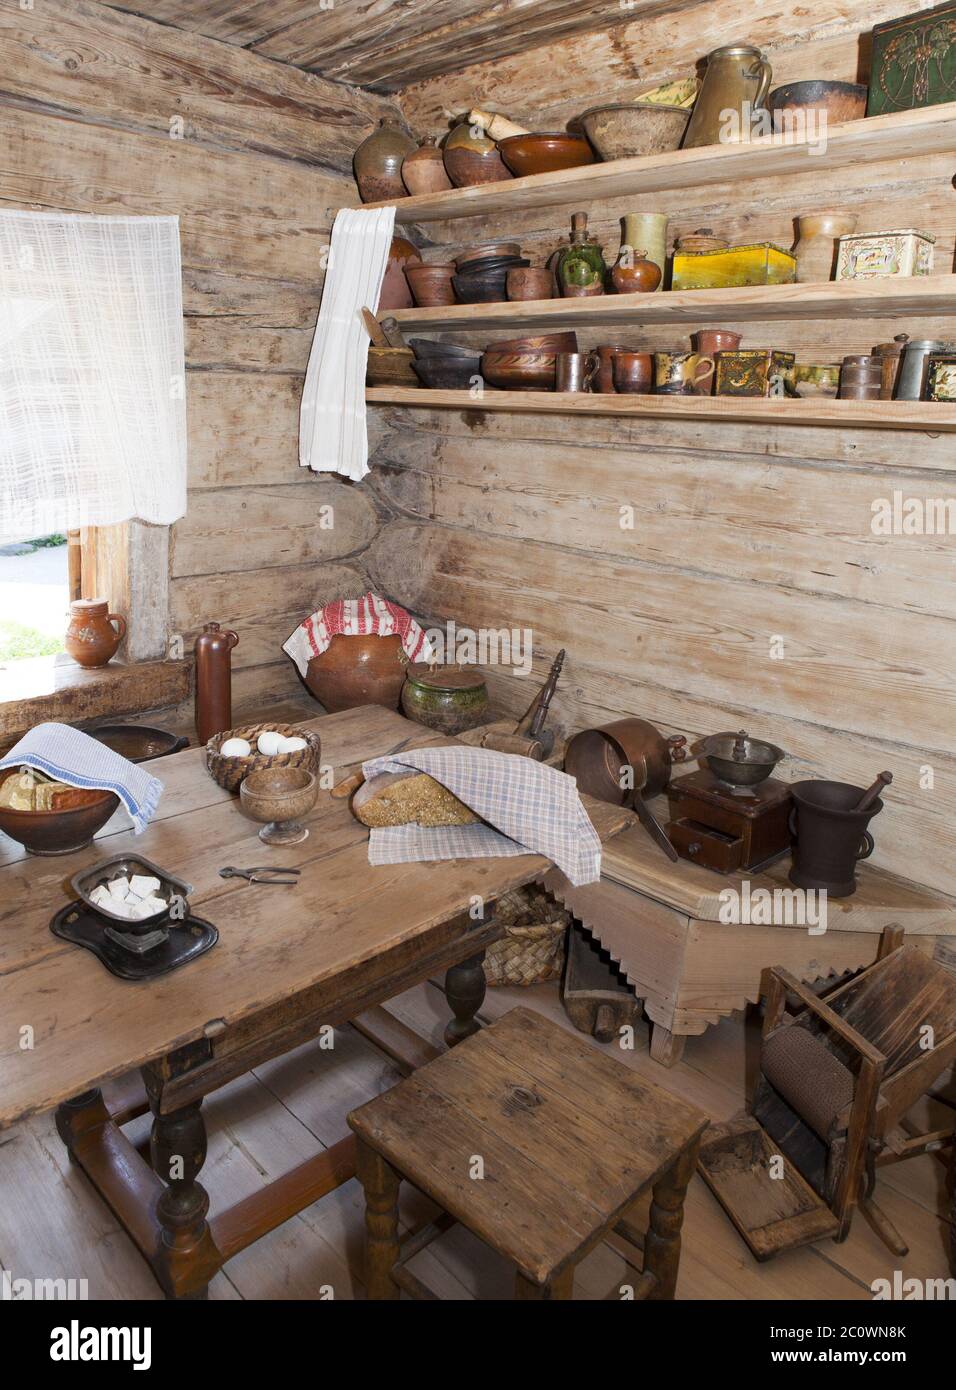 ancient kitchen in a wooden log hut, Russia Stock Photo